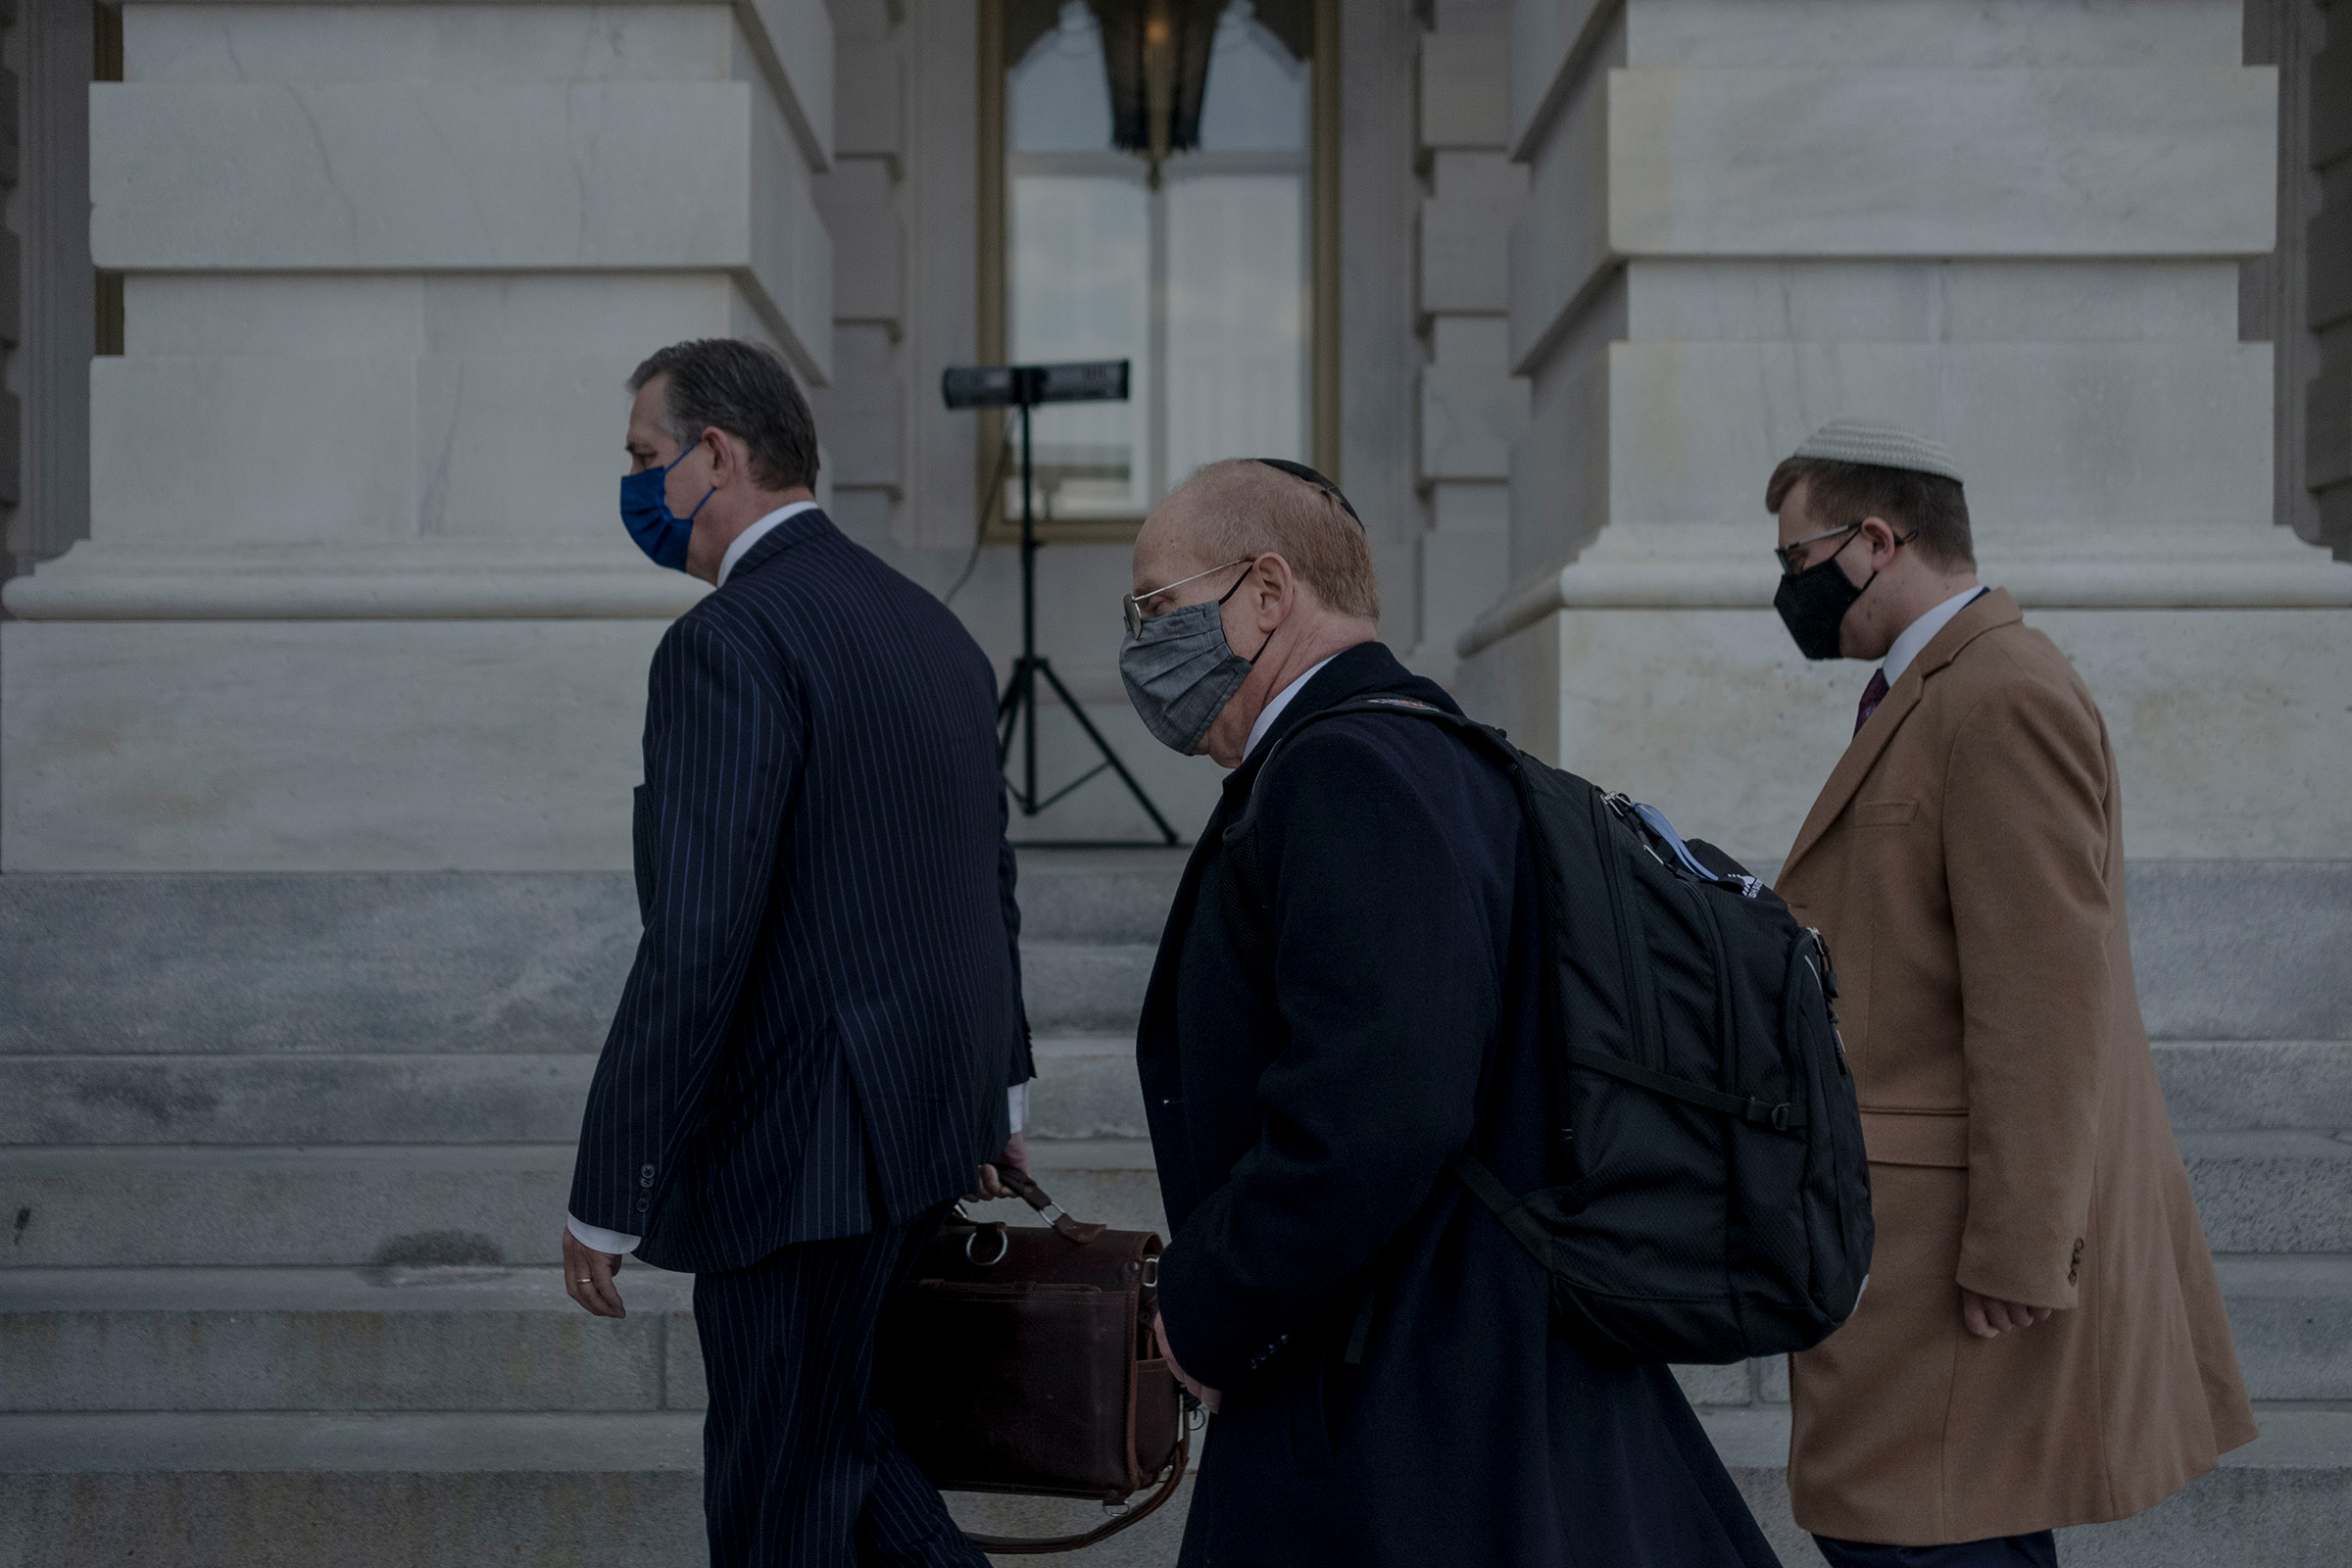 Attorneys for former President Donald Trump, Bruce Castor and David Schoen arrive prior to the start of the impeachment trial at the Capitol in Washington, on Feb. 10, 2021. (Gabriella Demczuk for TIME)